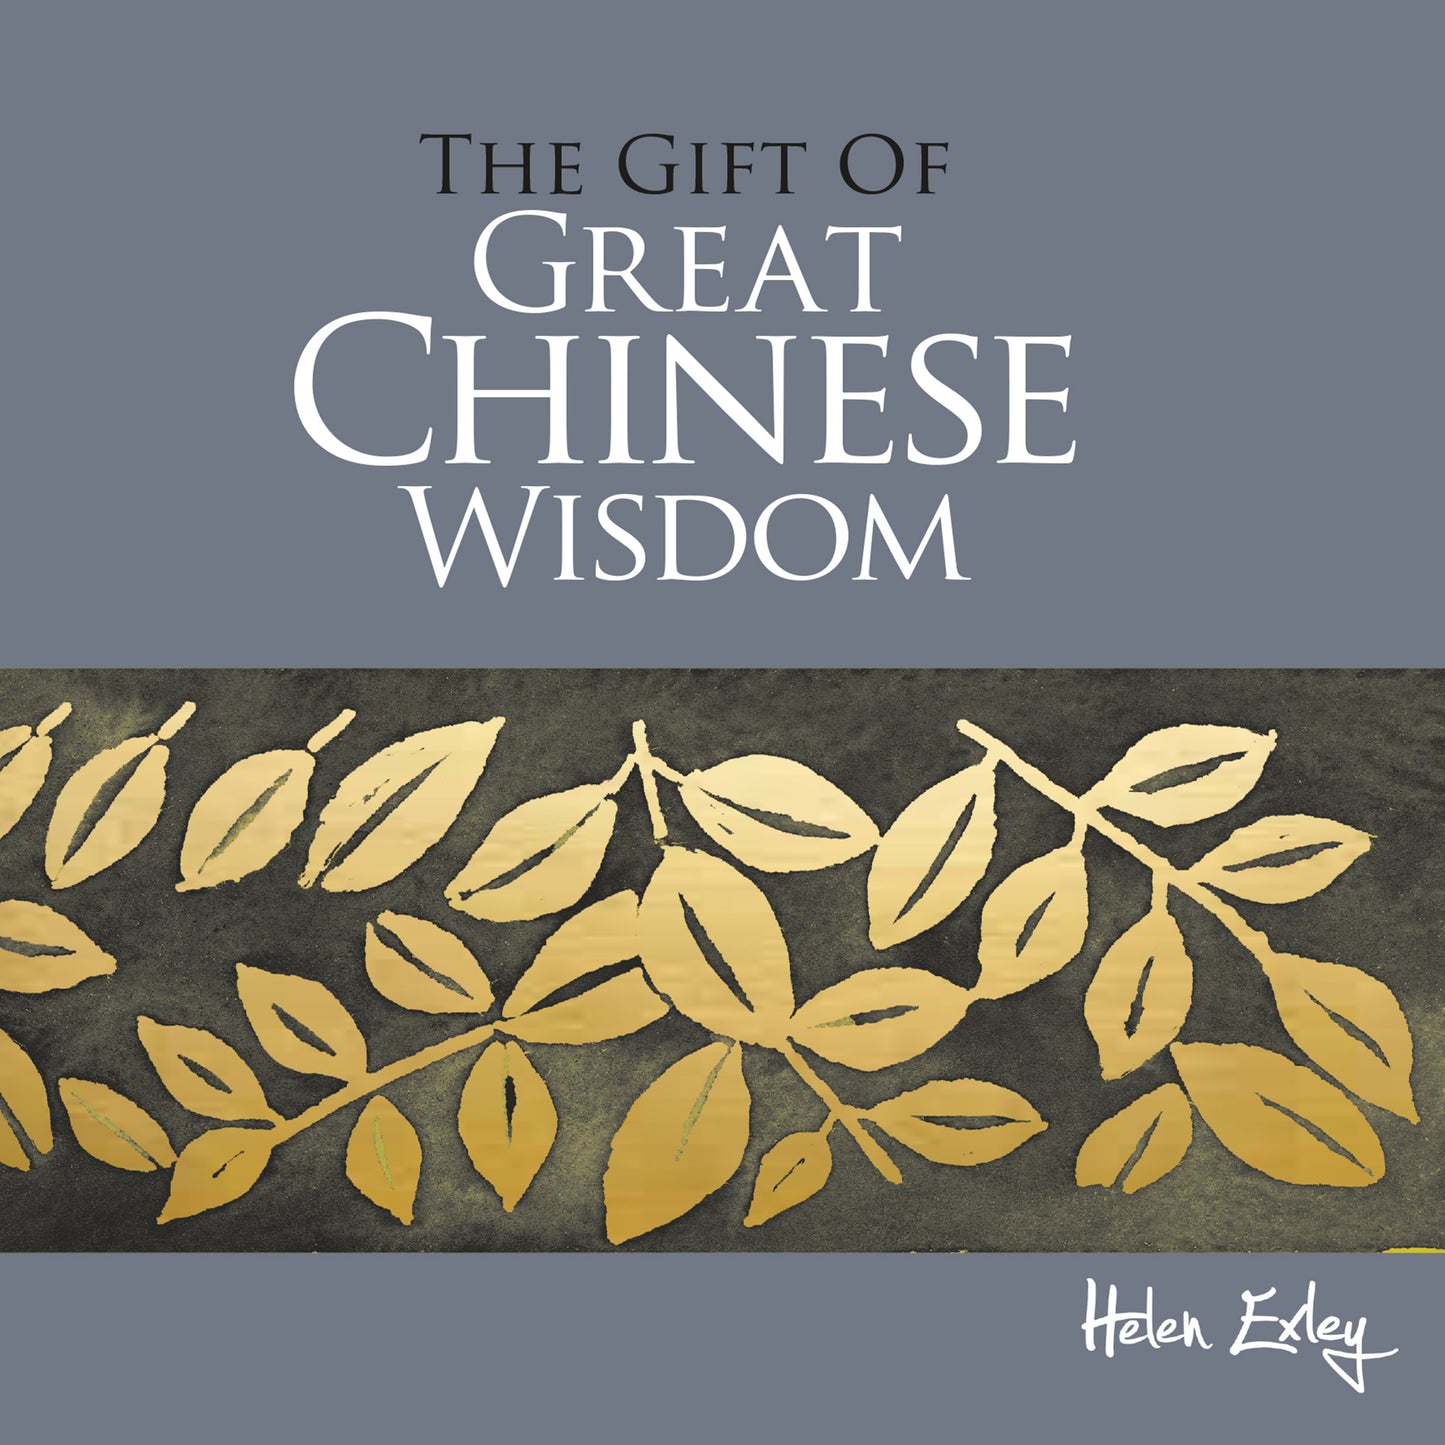 The Gift of Great Chinese Wisdom